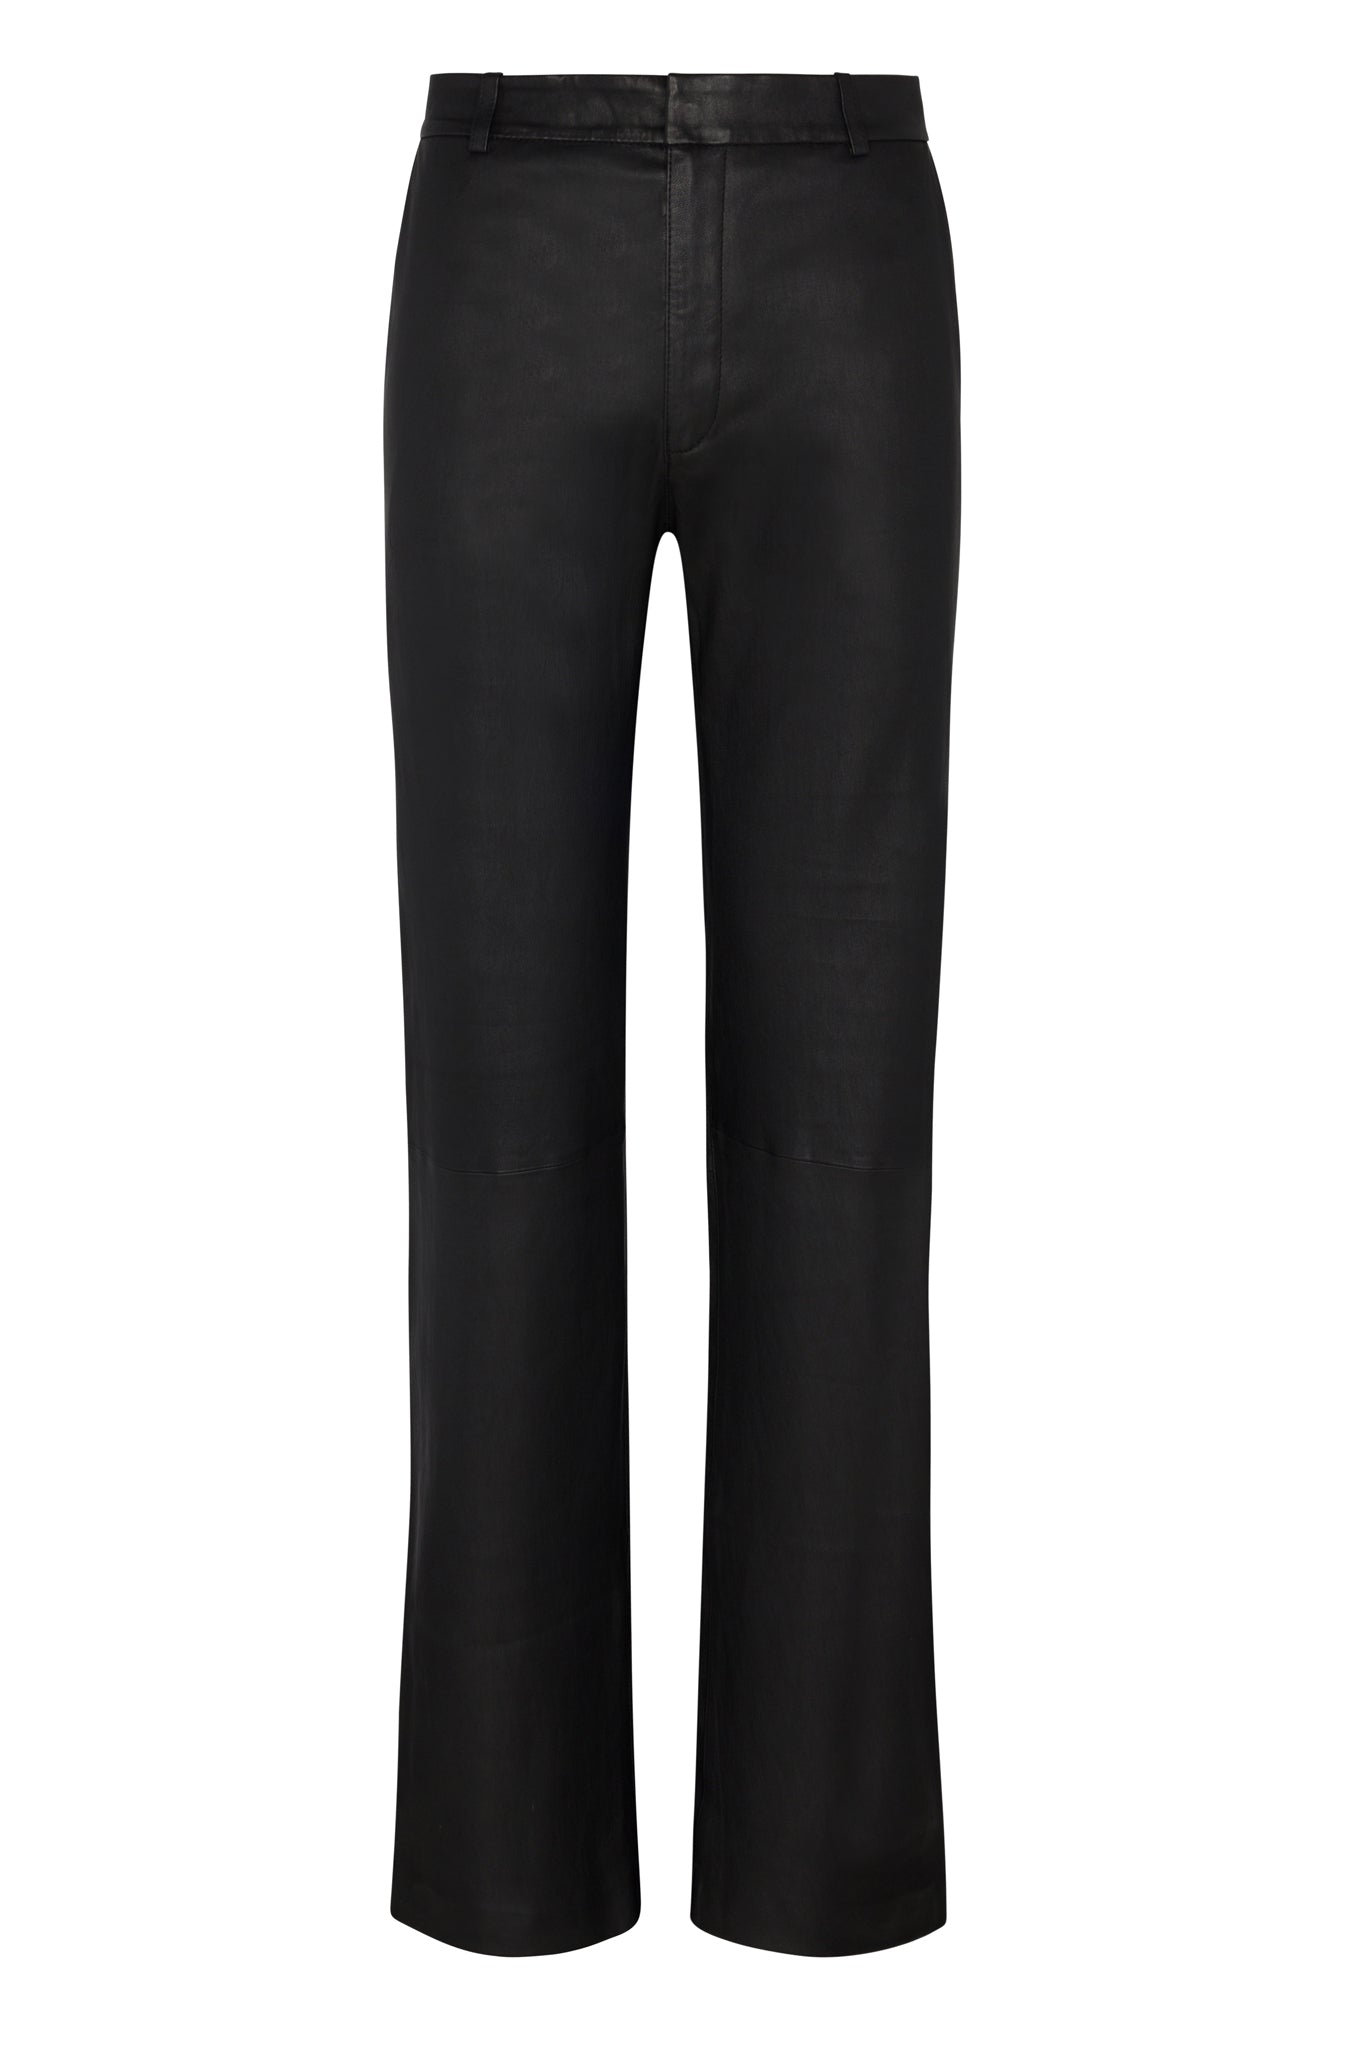 Black Leather Classic Trousers